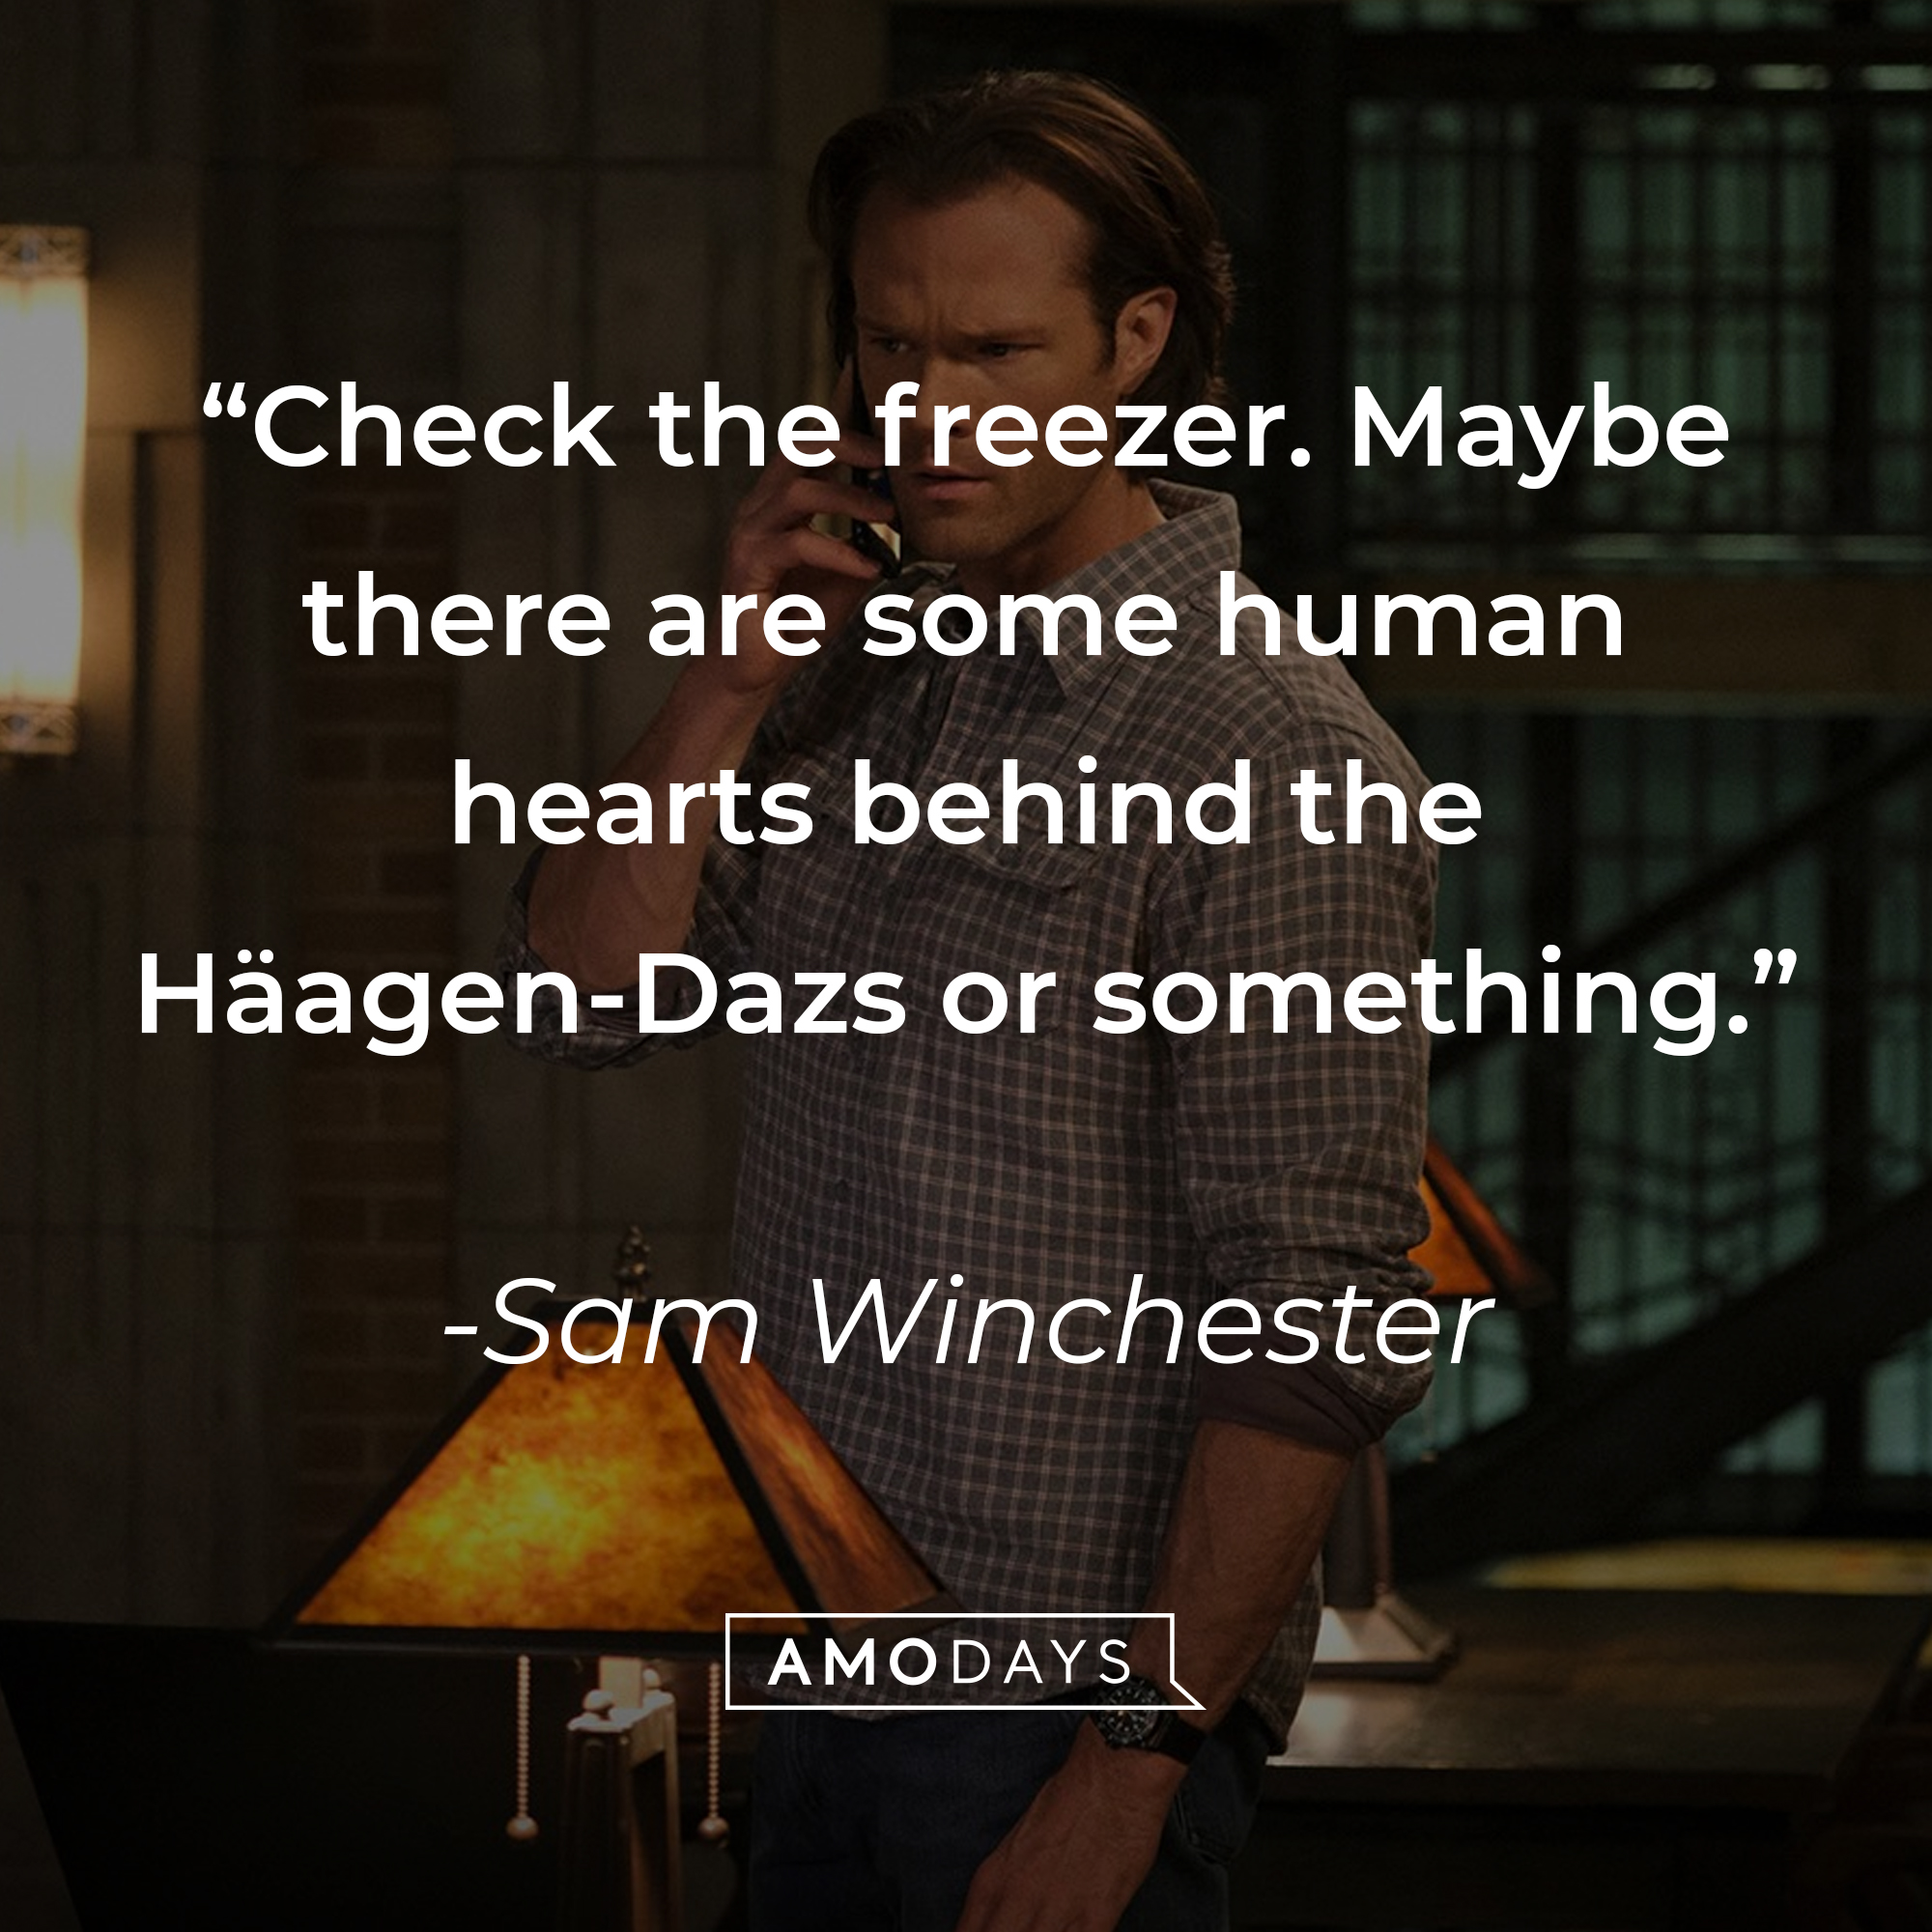 Sam Winchester's quote: "Check the freezer. Maybe there are some human hearts behind the Häagen-Dazs or something." | Source: Facebook.com/Supernatural